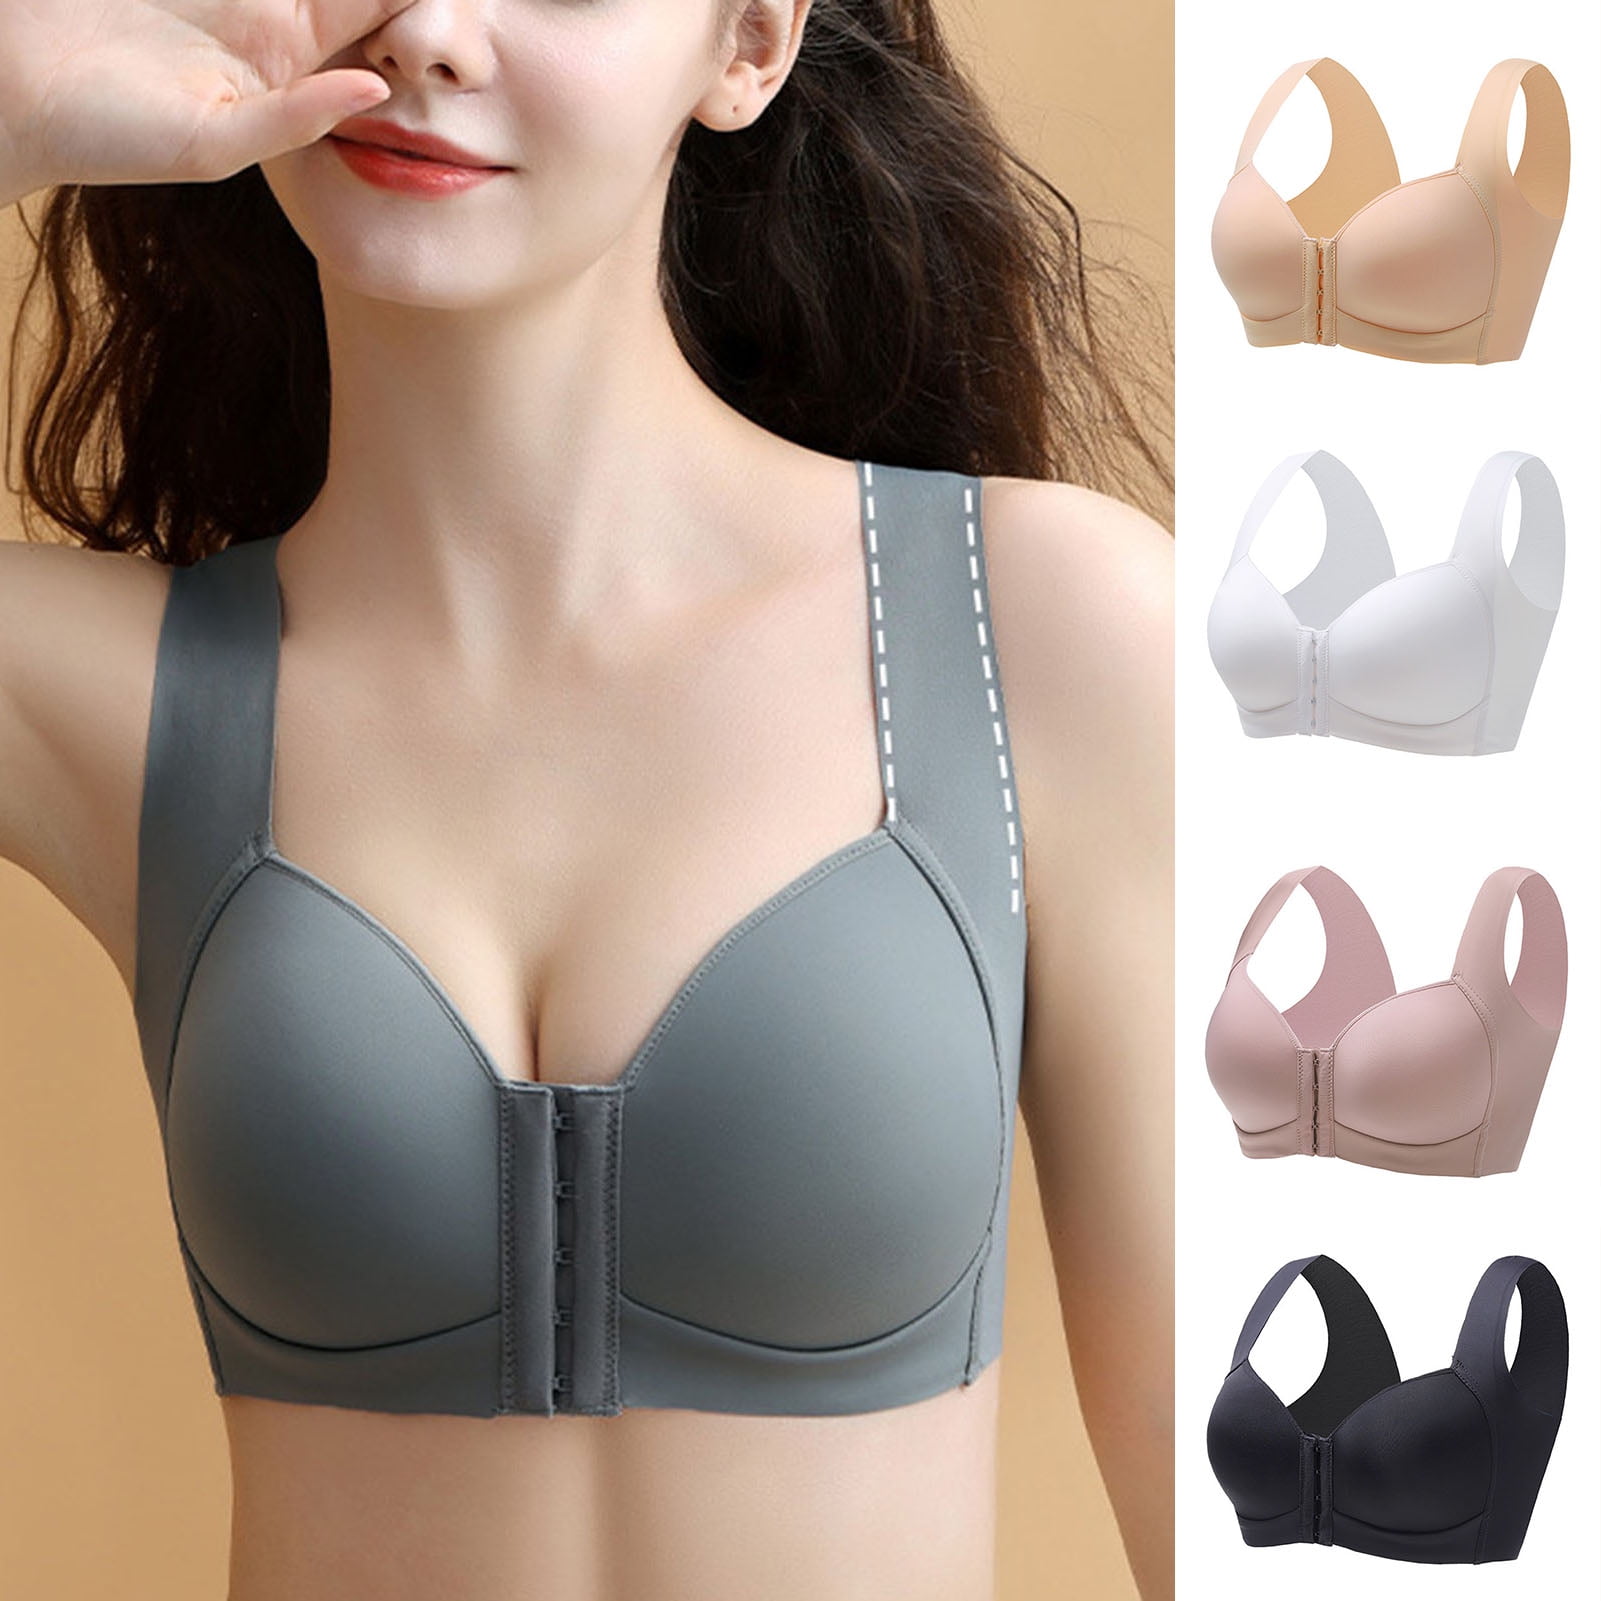 harmtty Wide Shoulder Straps Women Bra U-Shaped Back Wire Free Front  Closure Full Cup Sexy Bra for Daily Wear,Pink,42C 